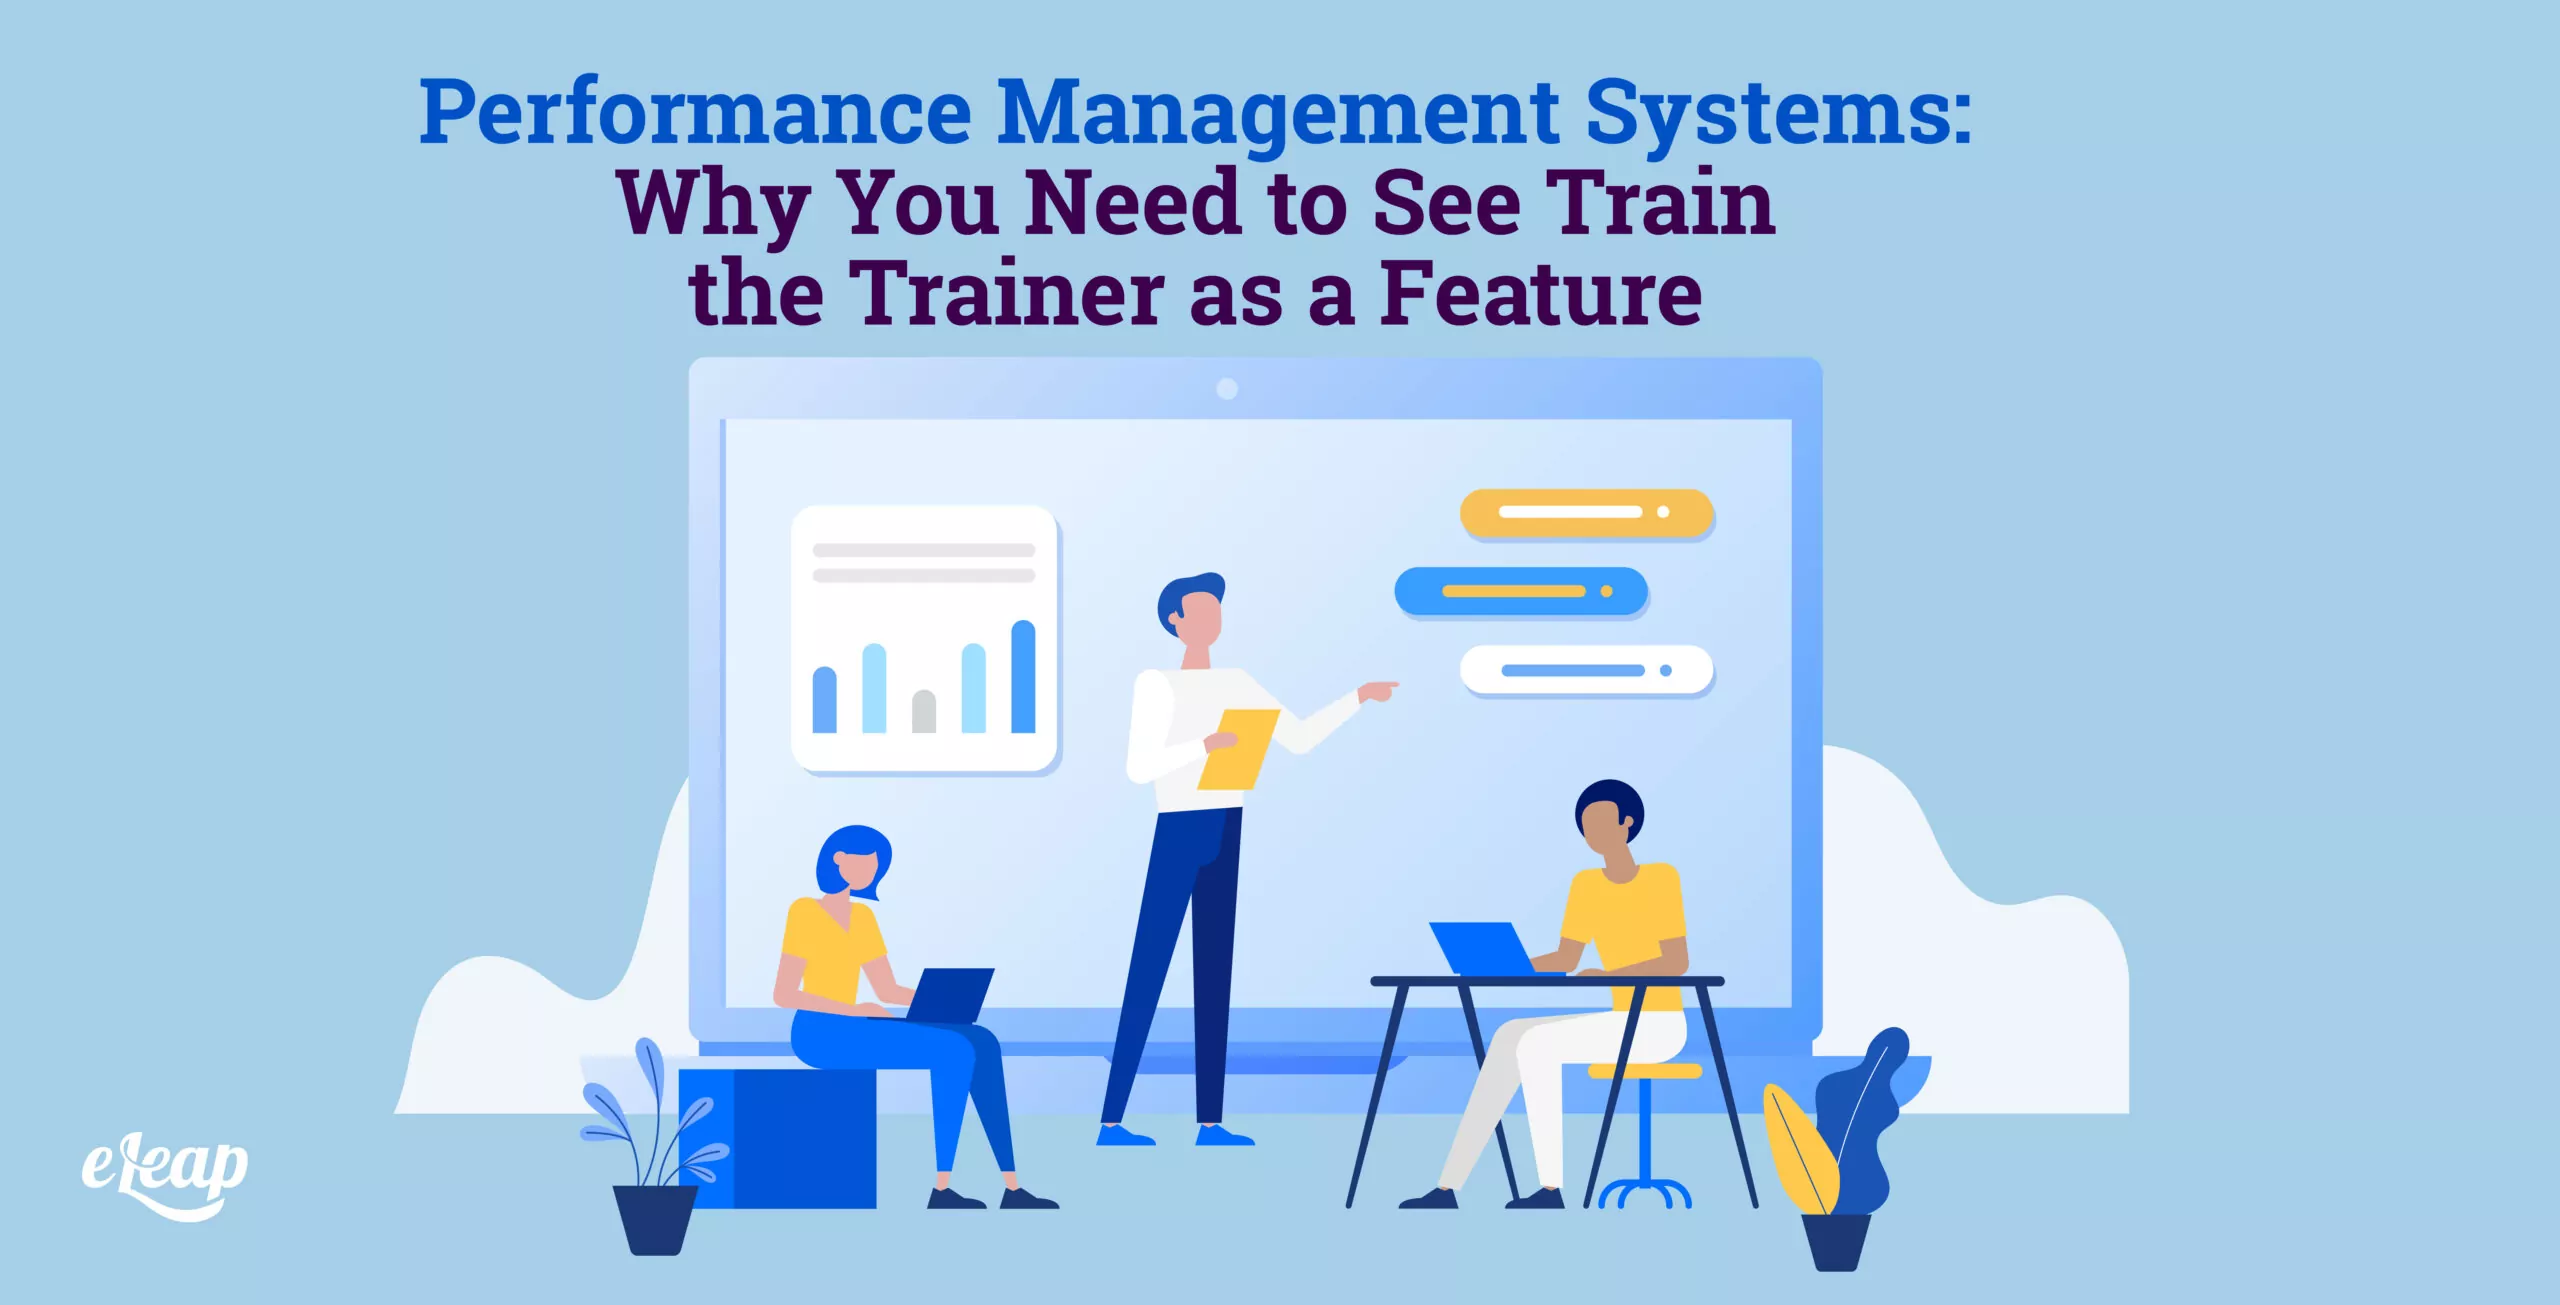 Performance Management Systems: Why You Need to See Train the Trainer as a Feature